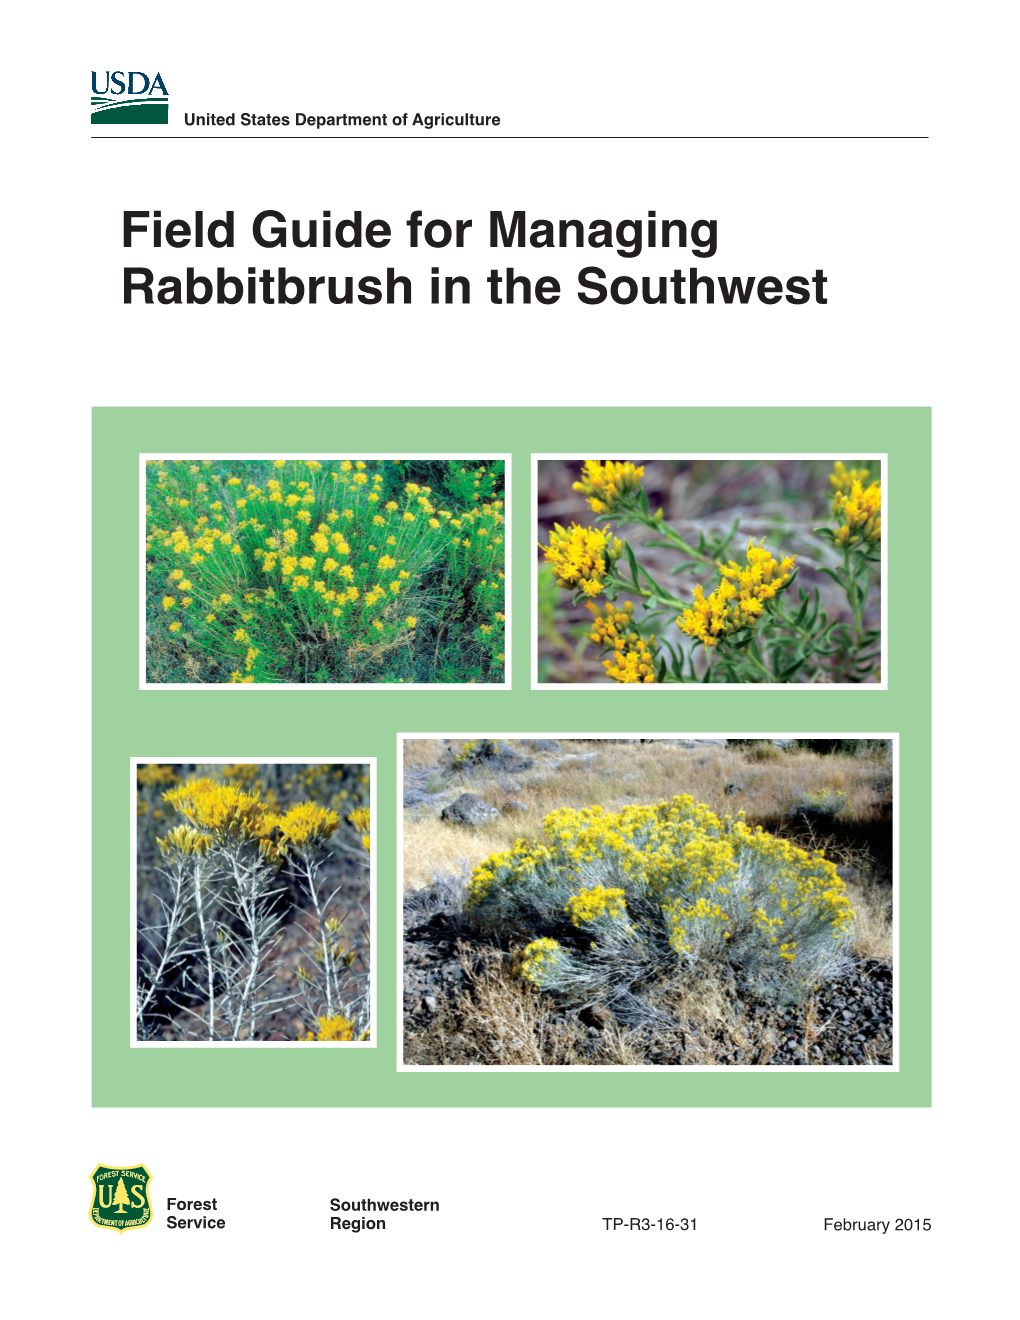 Field Guide for Managing Rabbitbrush in the Southwest